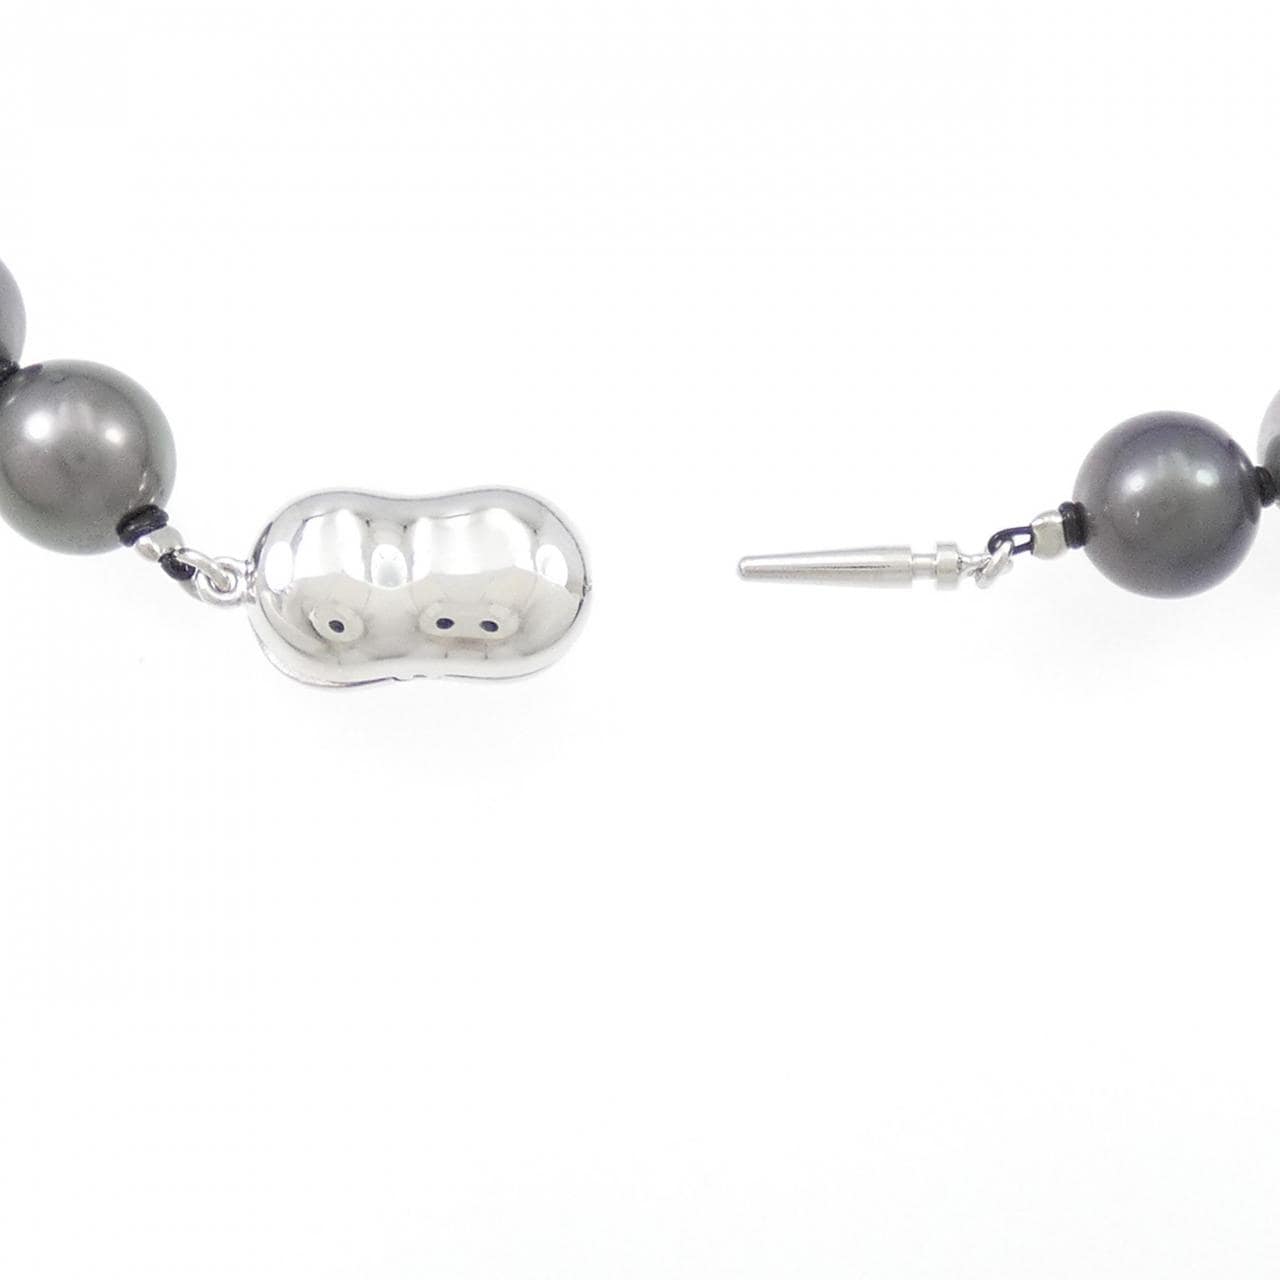 Silver clasp black butterfly pearl necklace 8-10.5mm